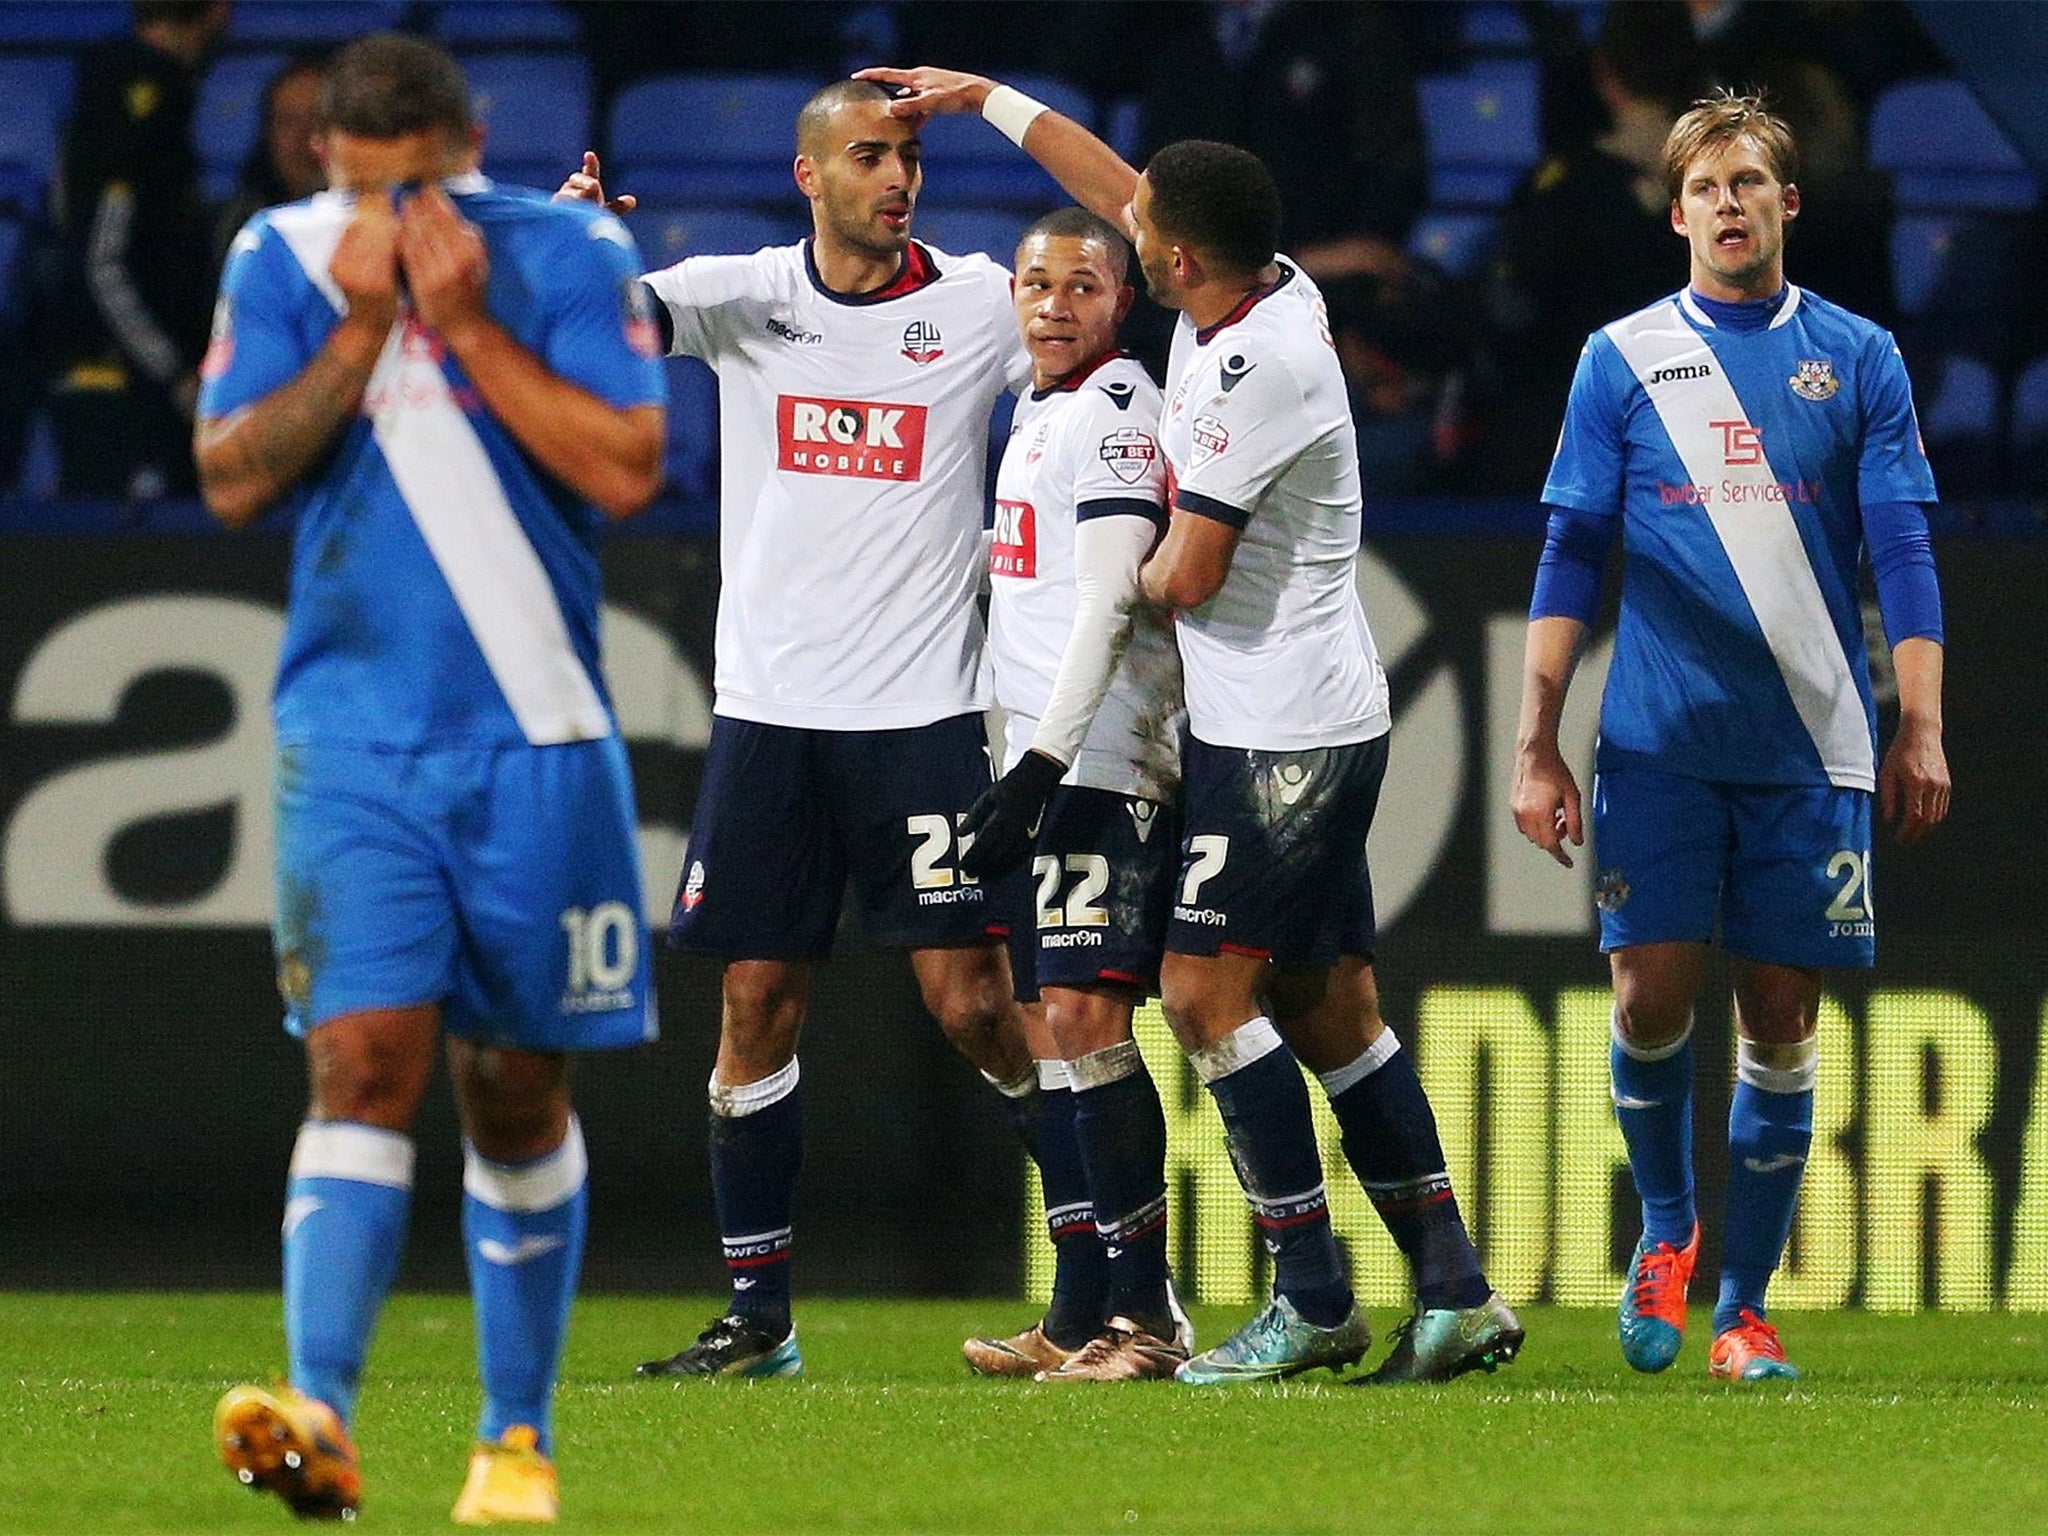 It is all too much for the Eastleigh players as Bolton’s Darren Pratley is congratulated after scoring the winner